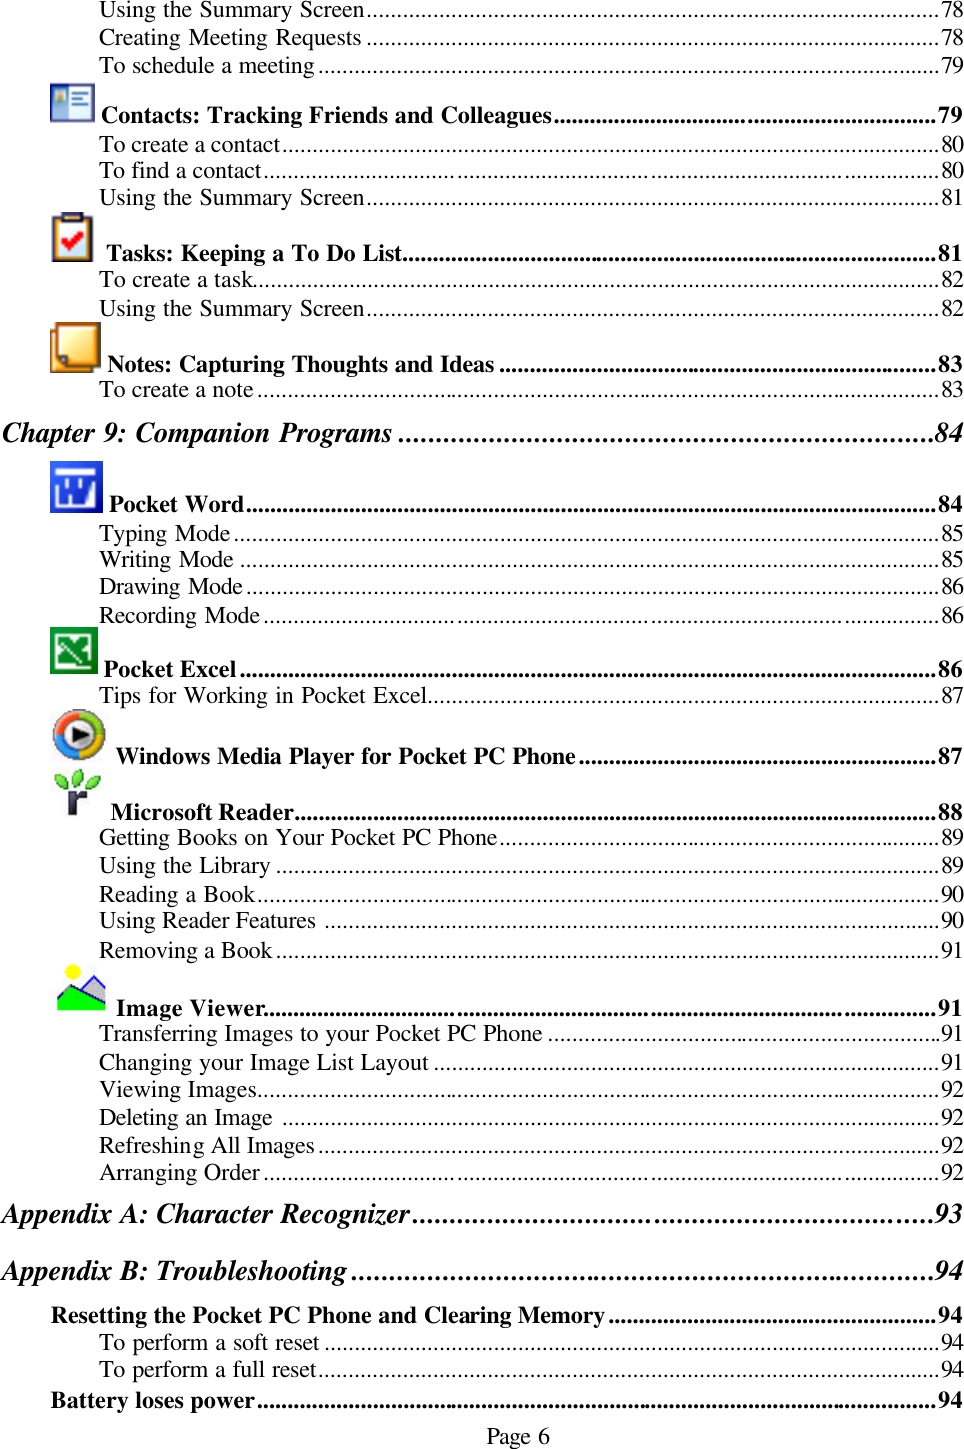 Page 6 Using the Summary Screen...............................................................................................78 Creating Meeting Requests ...............................................................................................78 To schedule a meeting.......................................................................................................79  Contacts: Tracking Friends and Colleagues...............................................................79 To create a contact.............................................................................................................80 To find a contact................................................................................................................80 Using the Summary Screen...............................................................................................81  Tasks: Keeping a To Do List........................................................................................81 To create a task..................................................................................................................82 Using the Summary Screen...............................................................................................82  Notes: Capturing Thoughts and Ideas ........................................................................83 To create a note.................................................................................................................83 Chapter 9: Companion Programs .......................................................................84  Pocket Word..................................................................................................................84 Typing Mode.....................................................................................................................85 Writing Mode ....................................................................................................................85 Drawing Mode...................................................................................................................86 Recording Mode................................................................................................................86  Pocket Excel...................................................................................................................86 Tips for Working in Pocket Excel.....................................................................................87  Windows Media Player for Pocket PC Phone...........................................................87  Microsoft Reader..........................................................................................................88 Getting Books on Your Pocket PC Phone.........................................................................89 Using the Library ..............................................................................................................89 Reading a Book.................................................................................................................90 Using Reader Features ......................................................................................................90 Removing a Book..............................................................................................................91  Image Viewer...............................................................................................................91 Transferring Images to your Pocket PC Phone .................................................................91 Changing your Image List Layout ....................................................................................91 Viewing Images.................................................................................................................92 Deleting an Image .............................................................................................................92 Refreshing All Images.......................................................................................................92 Arranging Order................................................................................................................92 Appendix A: Character Recognizer.....................................................................93 Appendix B: Troubleshooting .............................................................................94 Resetting the Pocket PC Phone and Clearing Memory......................................................94 To perform a soft reset ......................................................................................................94 To perform a full reset.......................................................................................................94 Battery loses power................................................................................................................94 